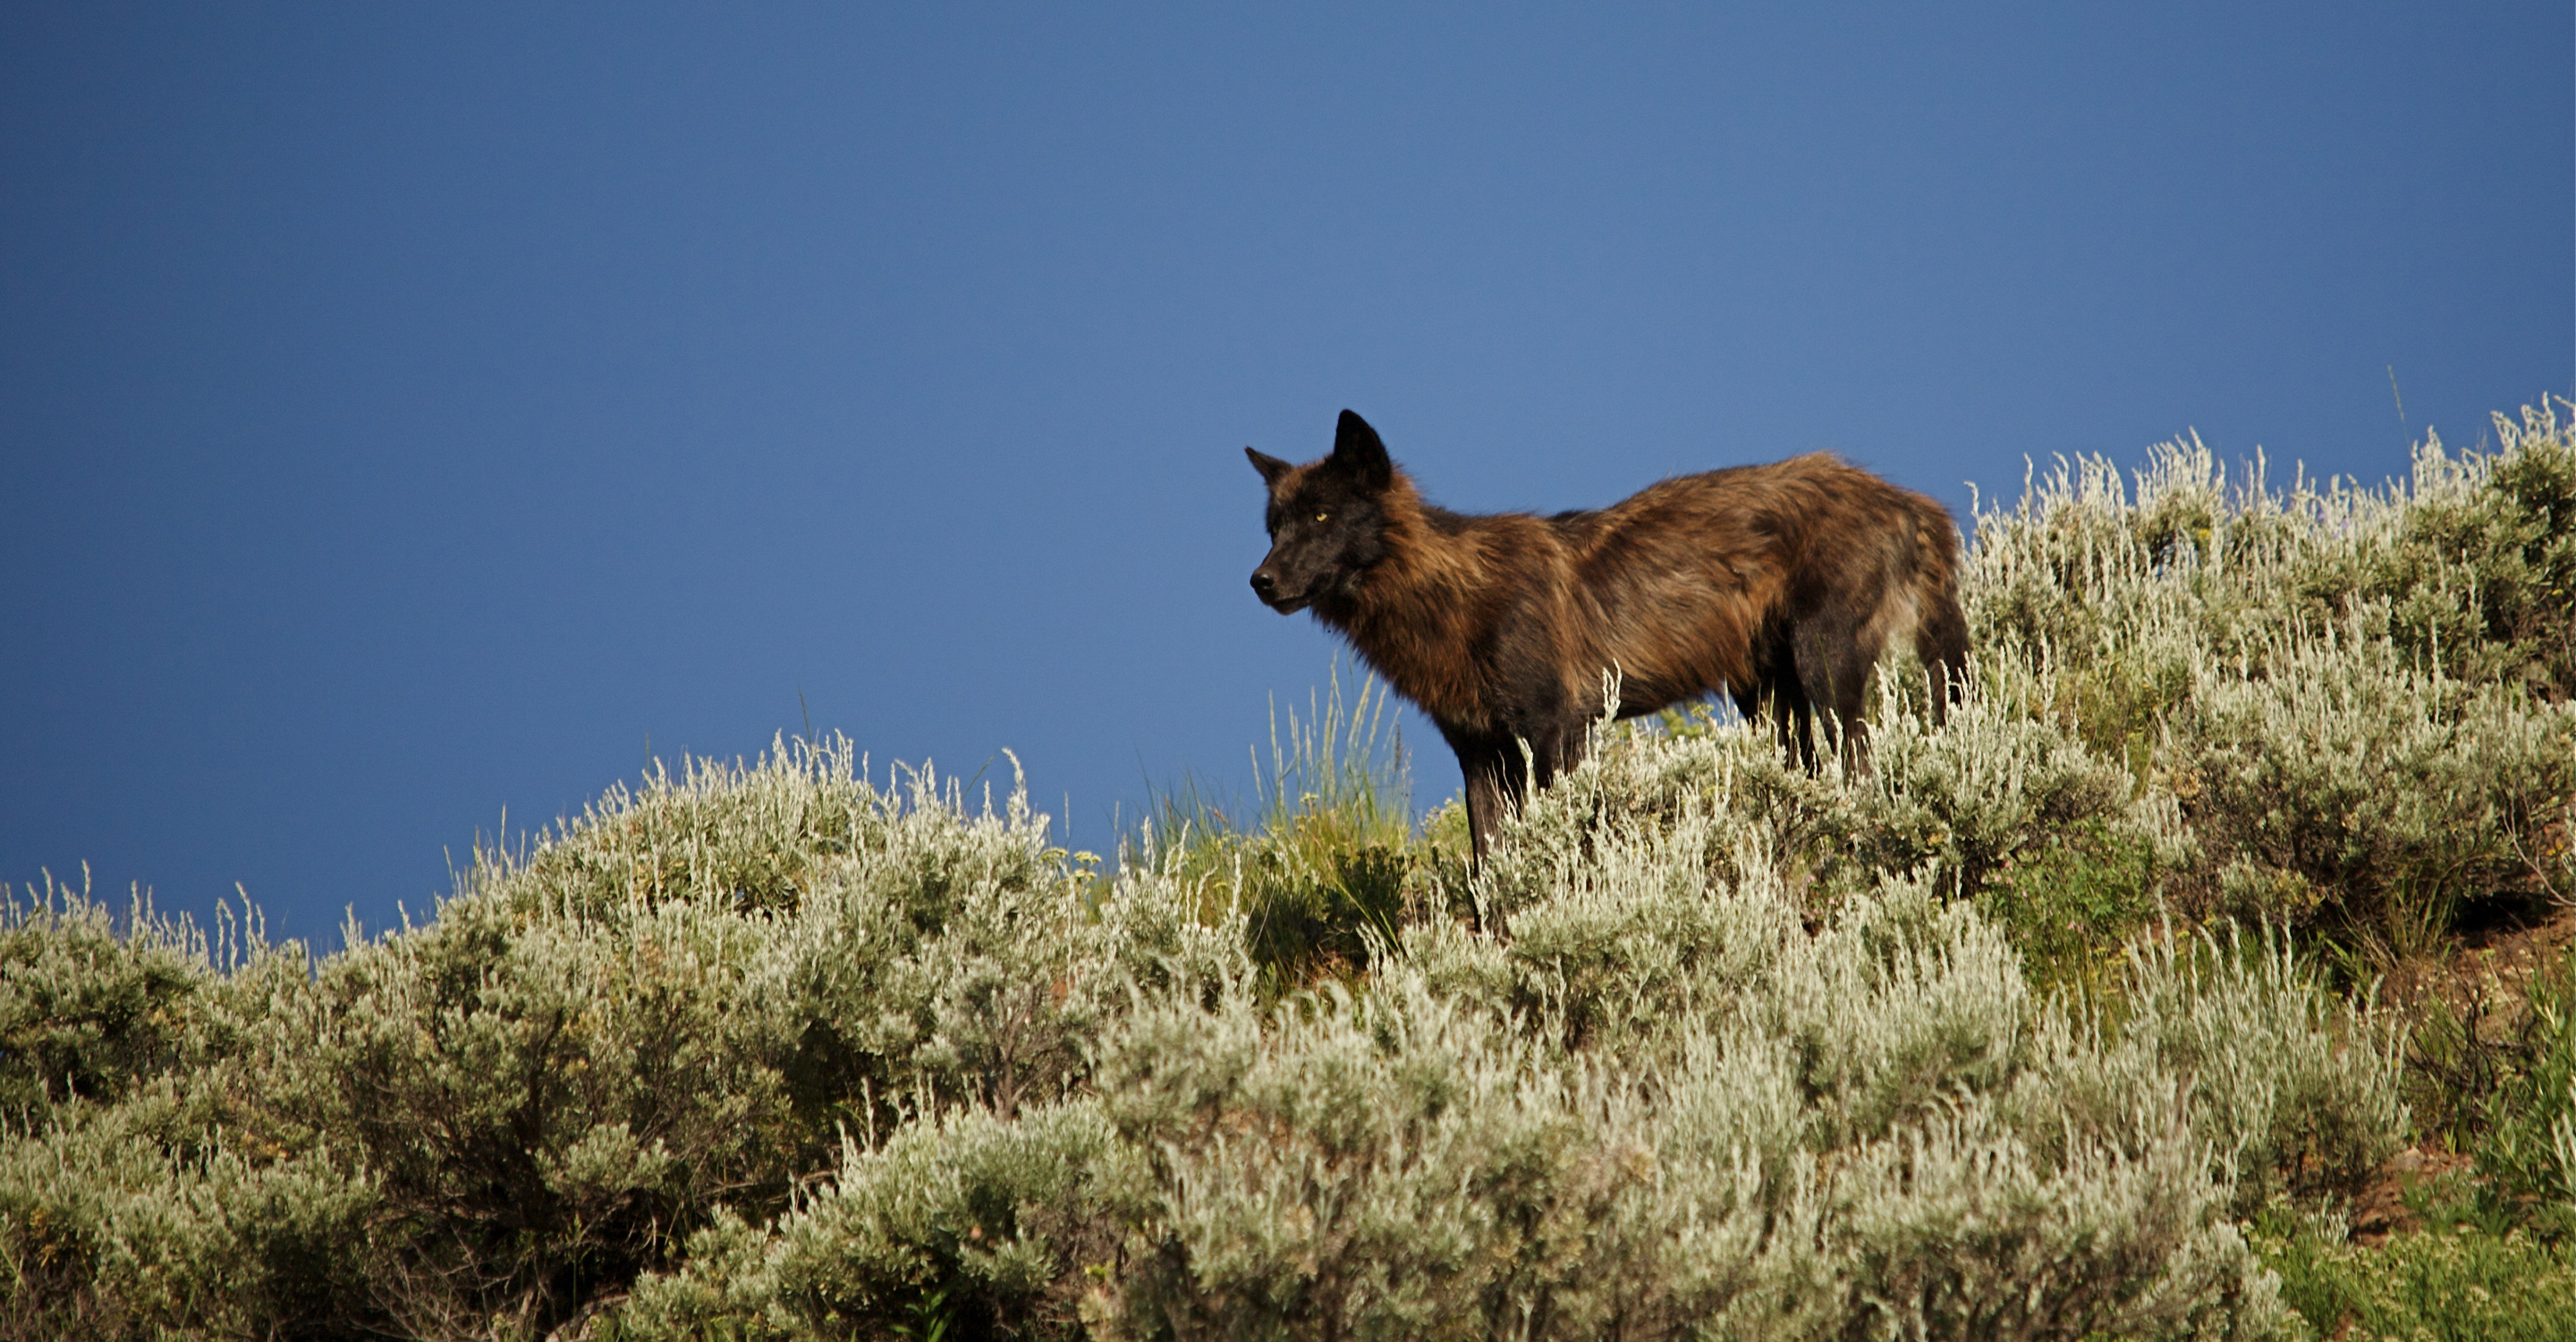 A black wolf from the Druid Peak Pack stands on a hill in Yellowstone National Park, United States